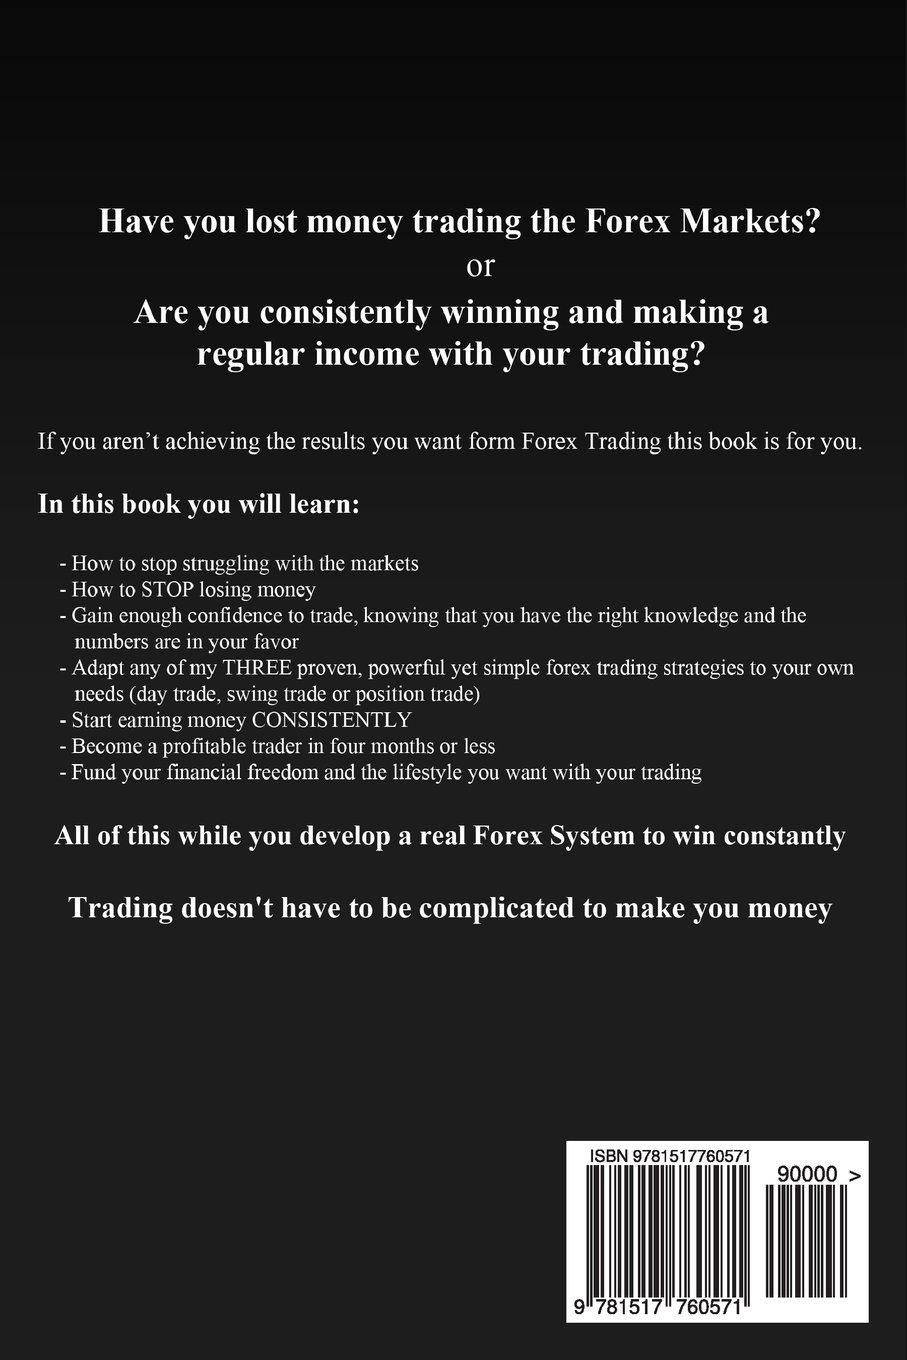 Black Book of Forex Trading: A Proven Method to Become a Profita - SureShot Books Publishing LLC